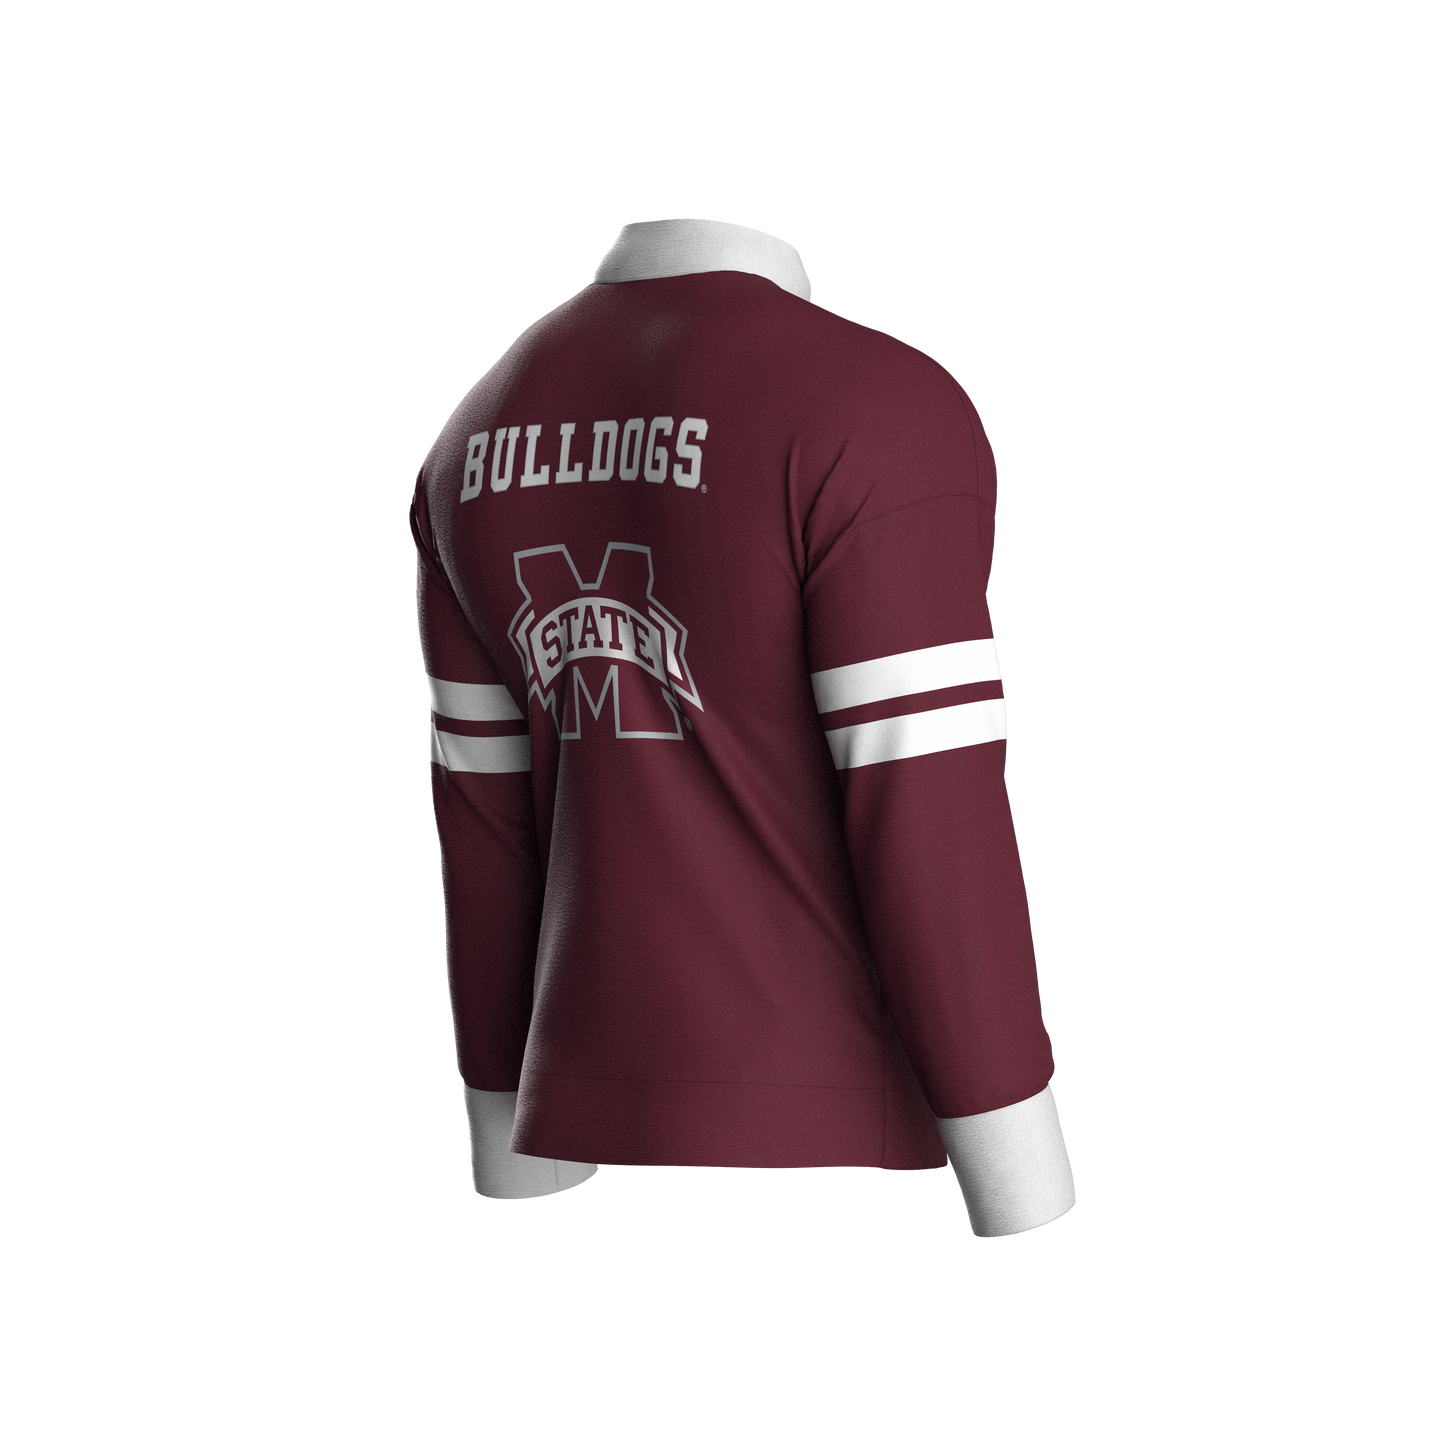 Mississippi State University Home Zip-Up (adult)